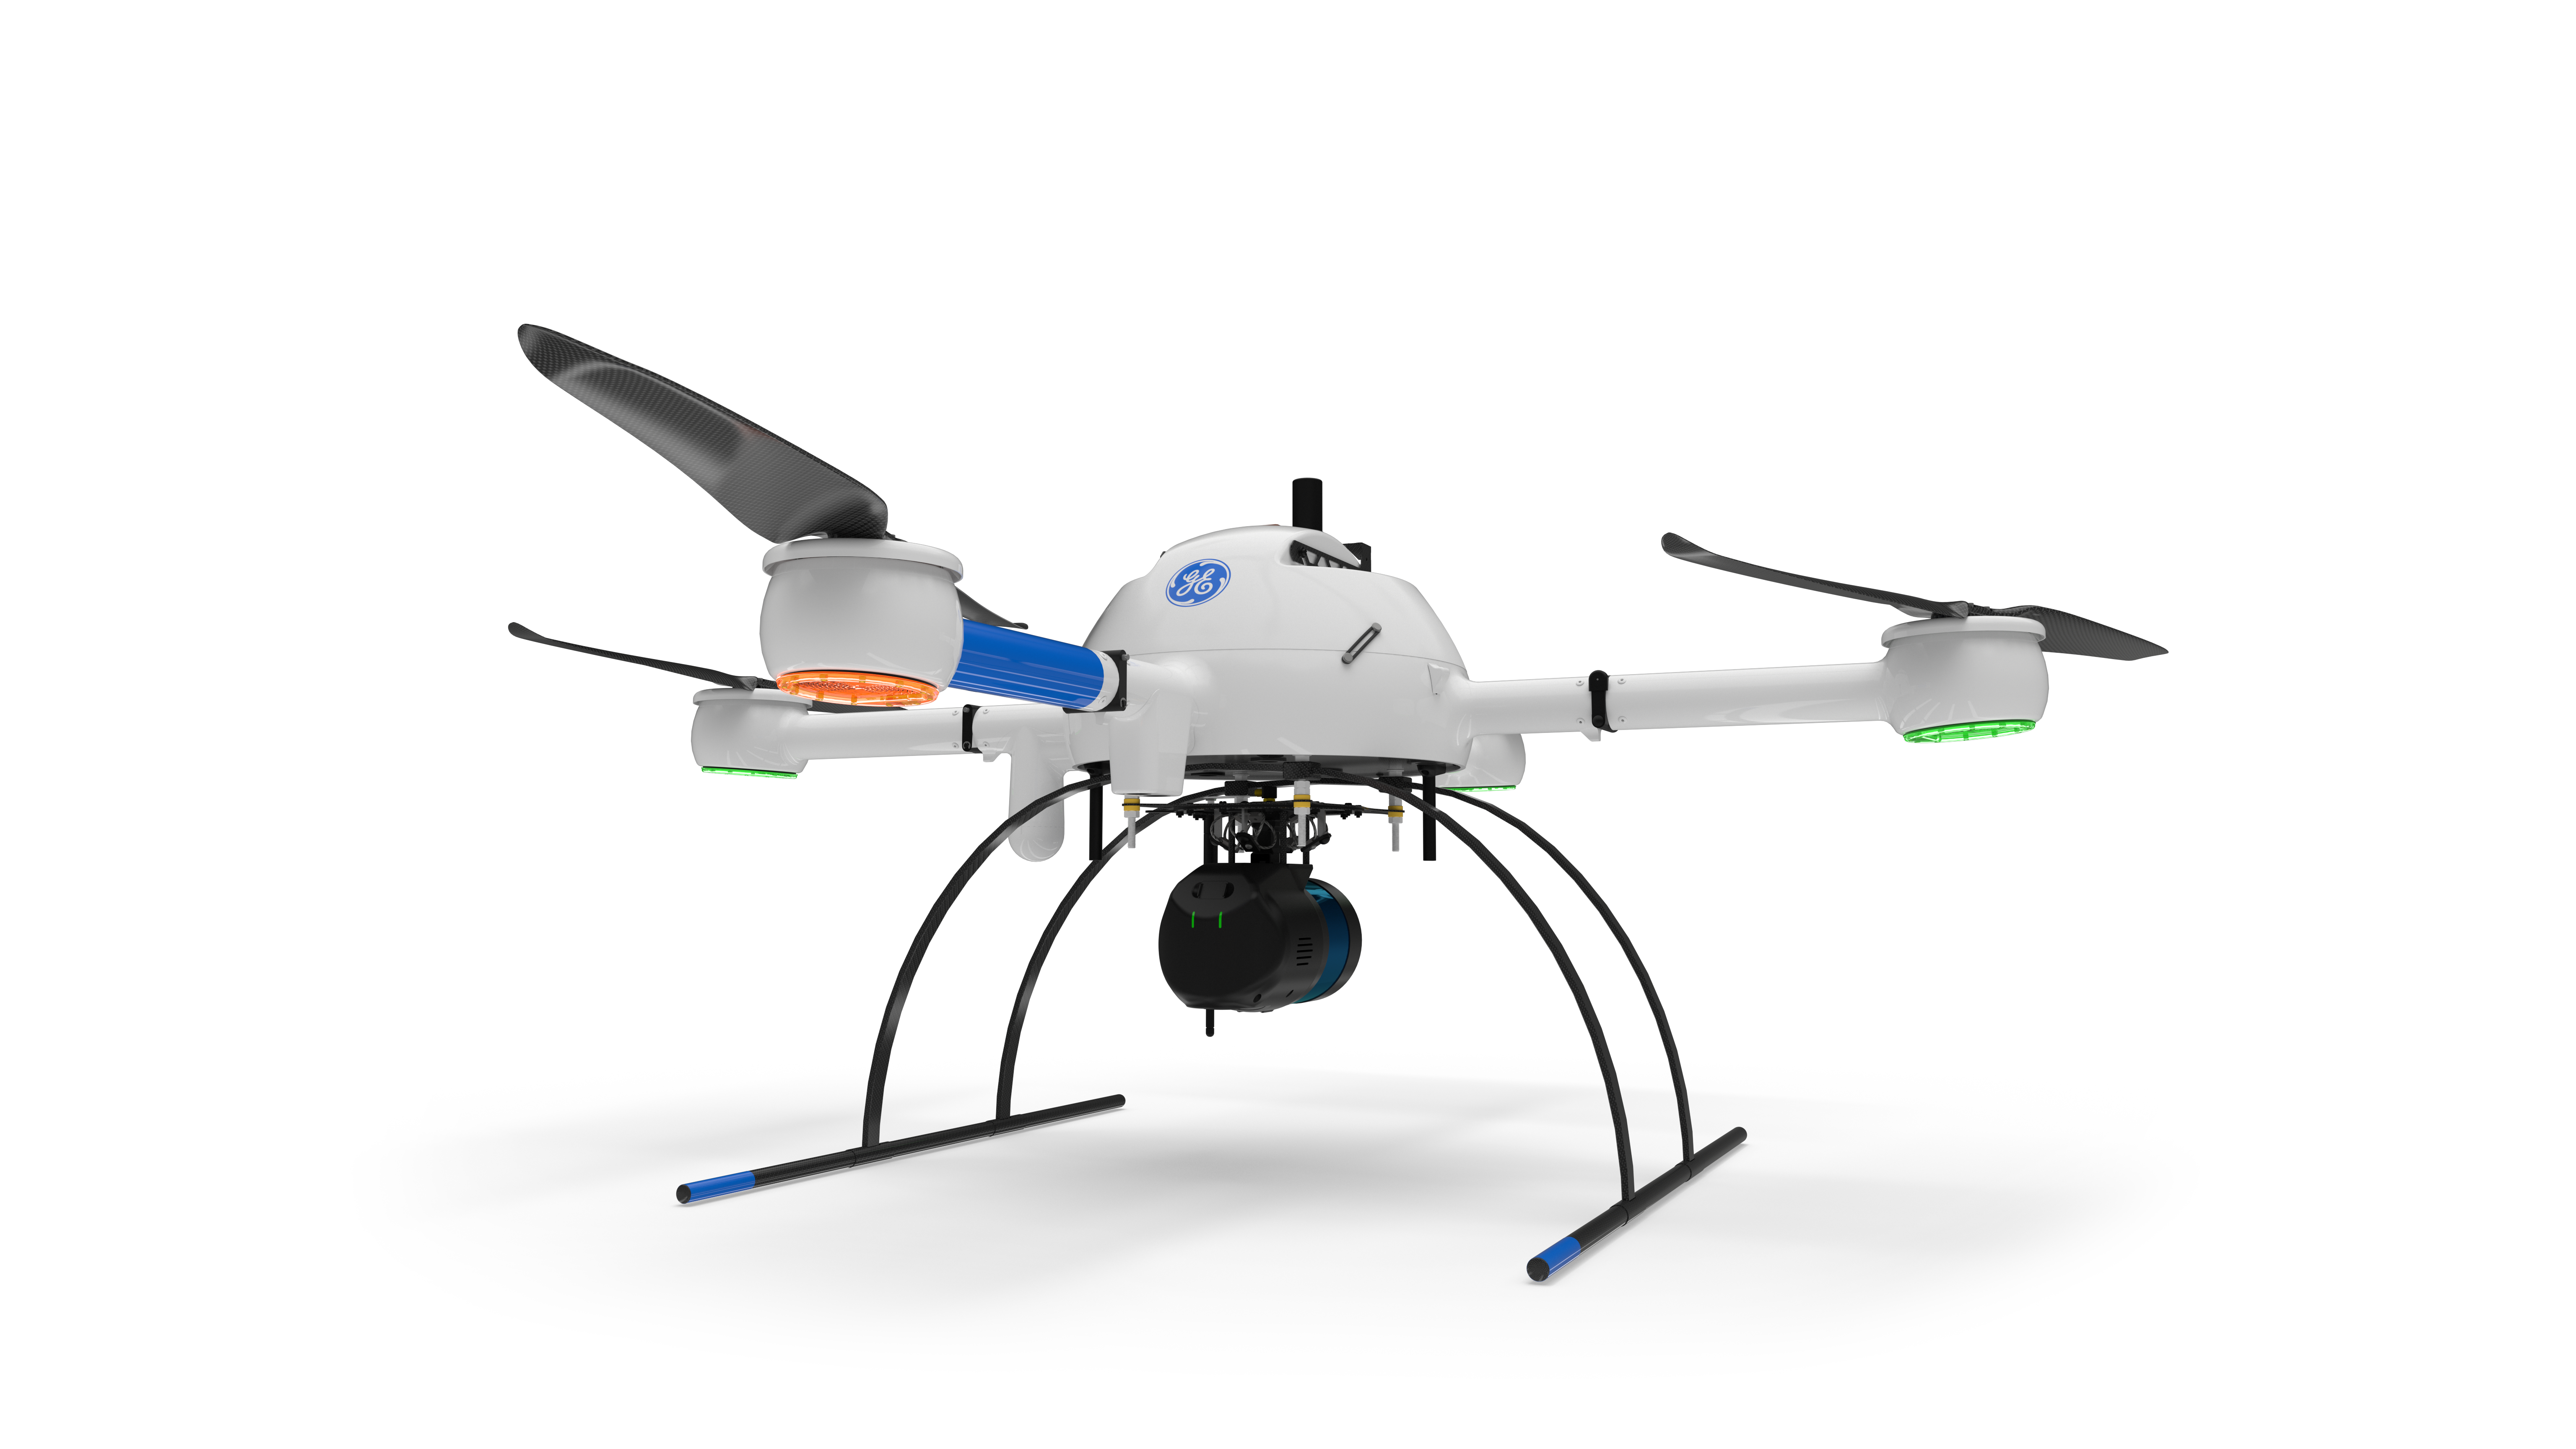 The newest member of the GE industrial drone line, the mdLIDAR1000LR will empower users to create and maintain digital twins of their assets and project sites.